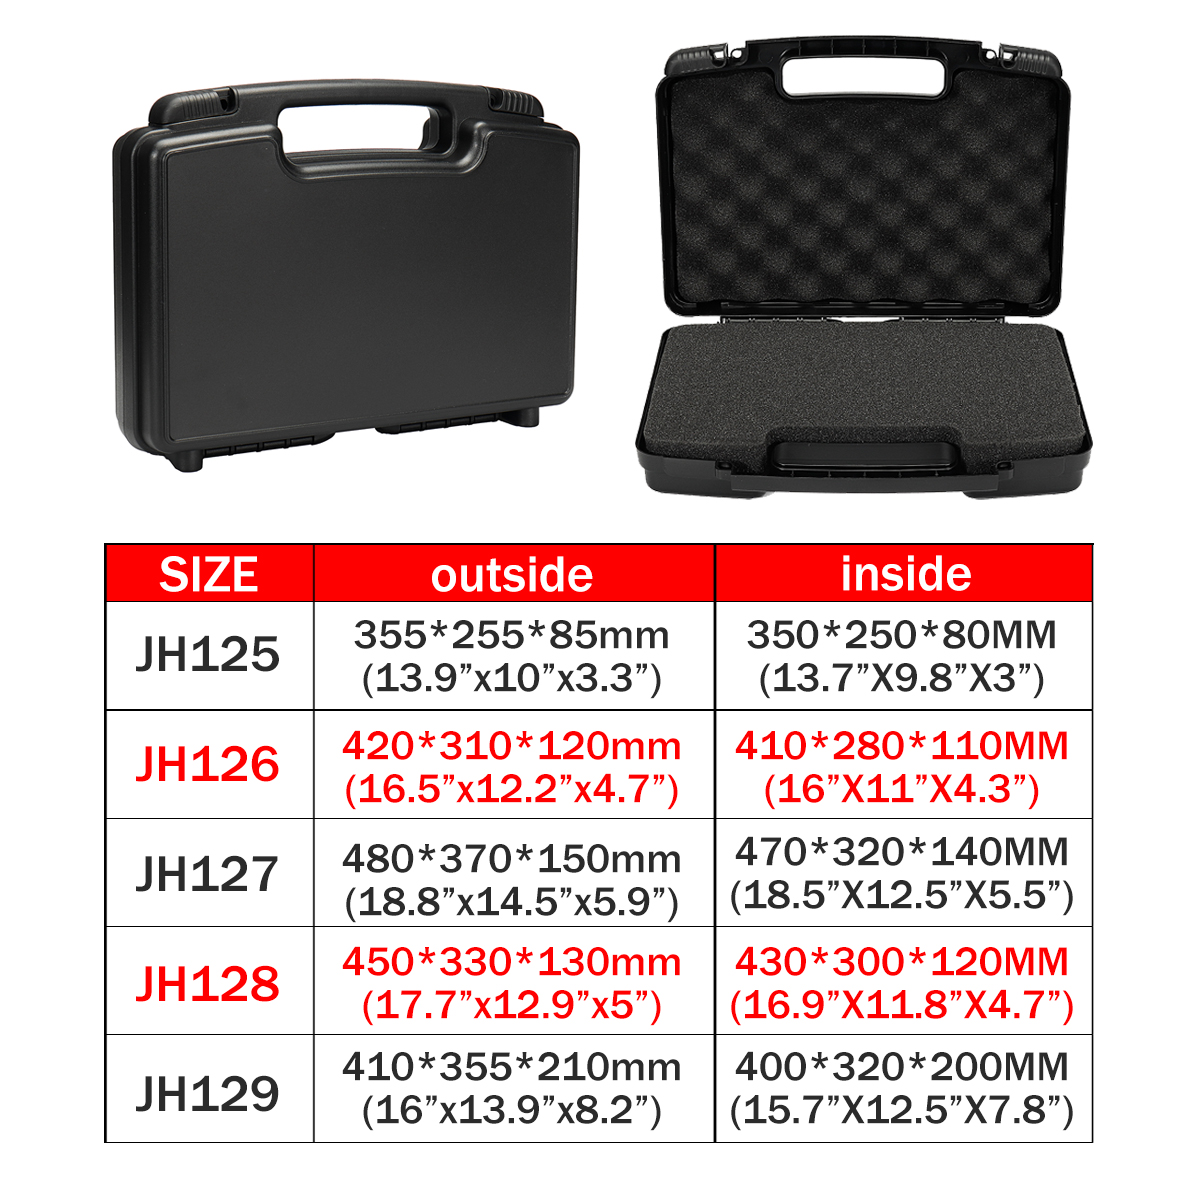 Waterproof-Hard-Carry-Tool-Case-Bag-Storage-Box-Camera-Photography-with-Foam-1791082-3